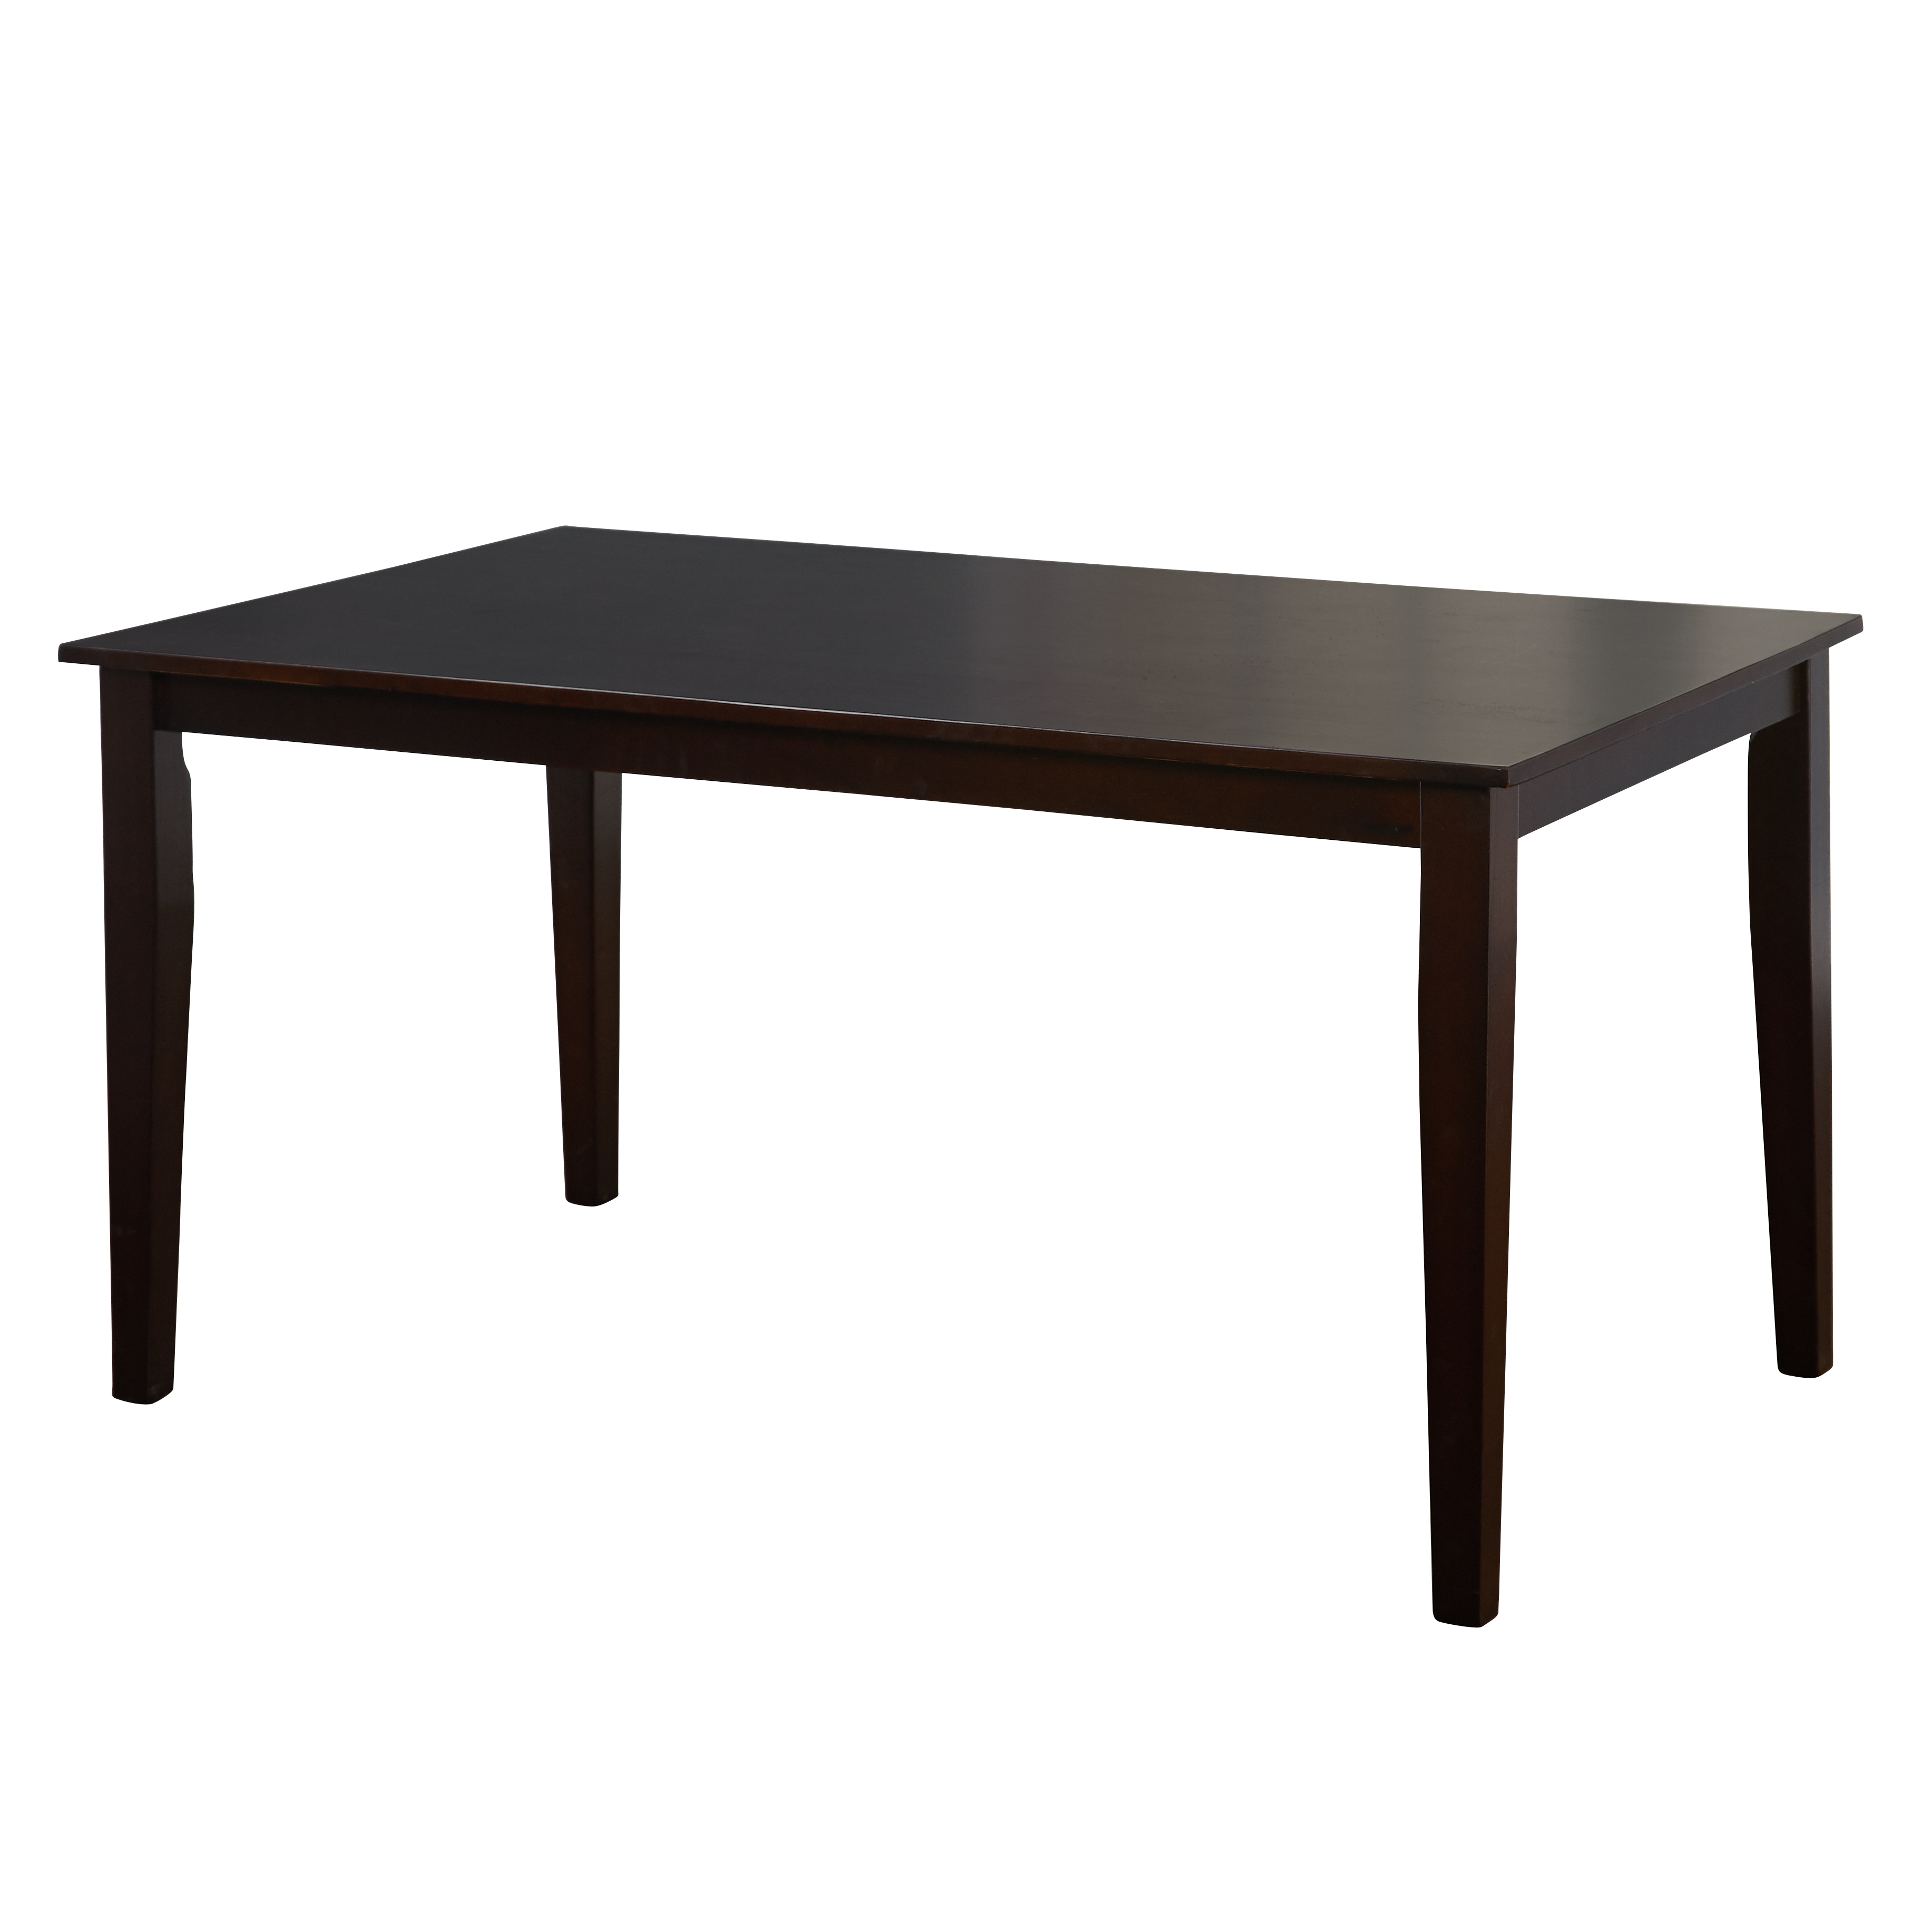 TMS Mid-Century 60" Indoor Dining Table, Espresso - image 4 of 6